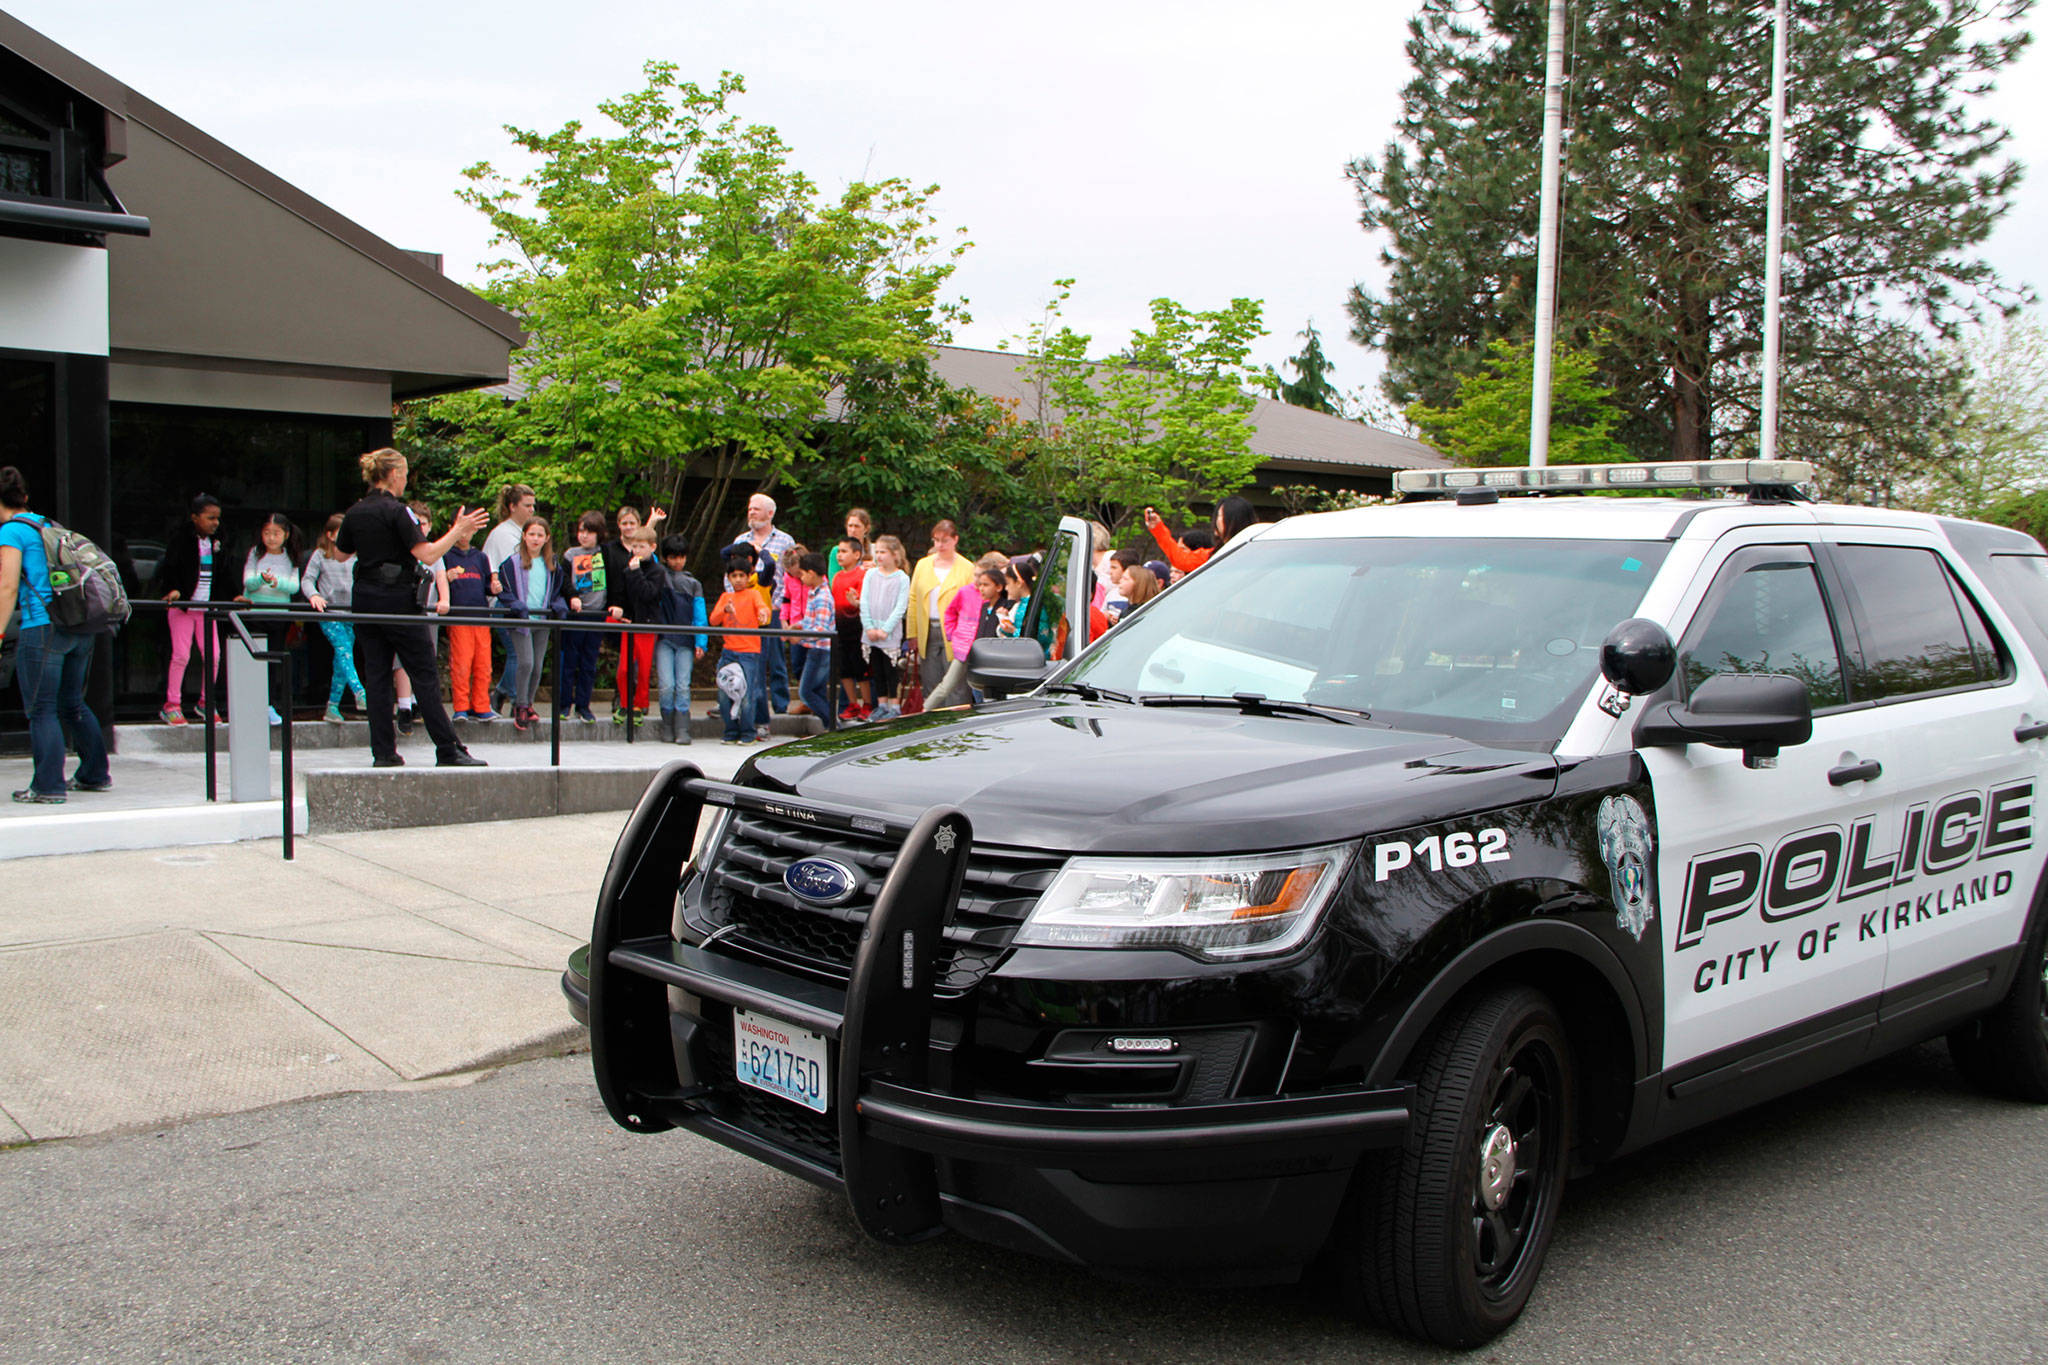 One of the things Kirkland’s Proposition 1 will pay for is police services. Courtesy photo